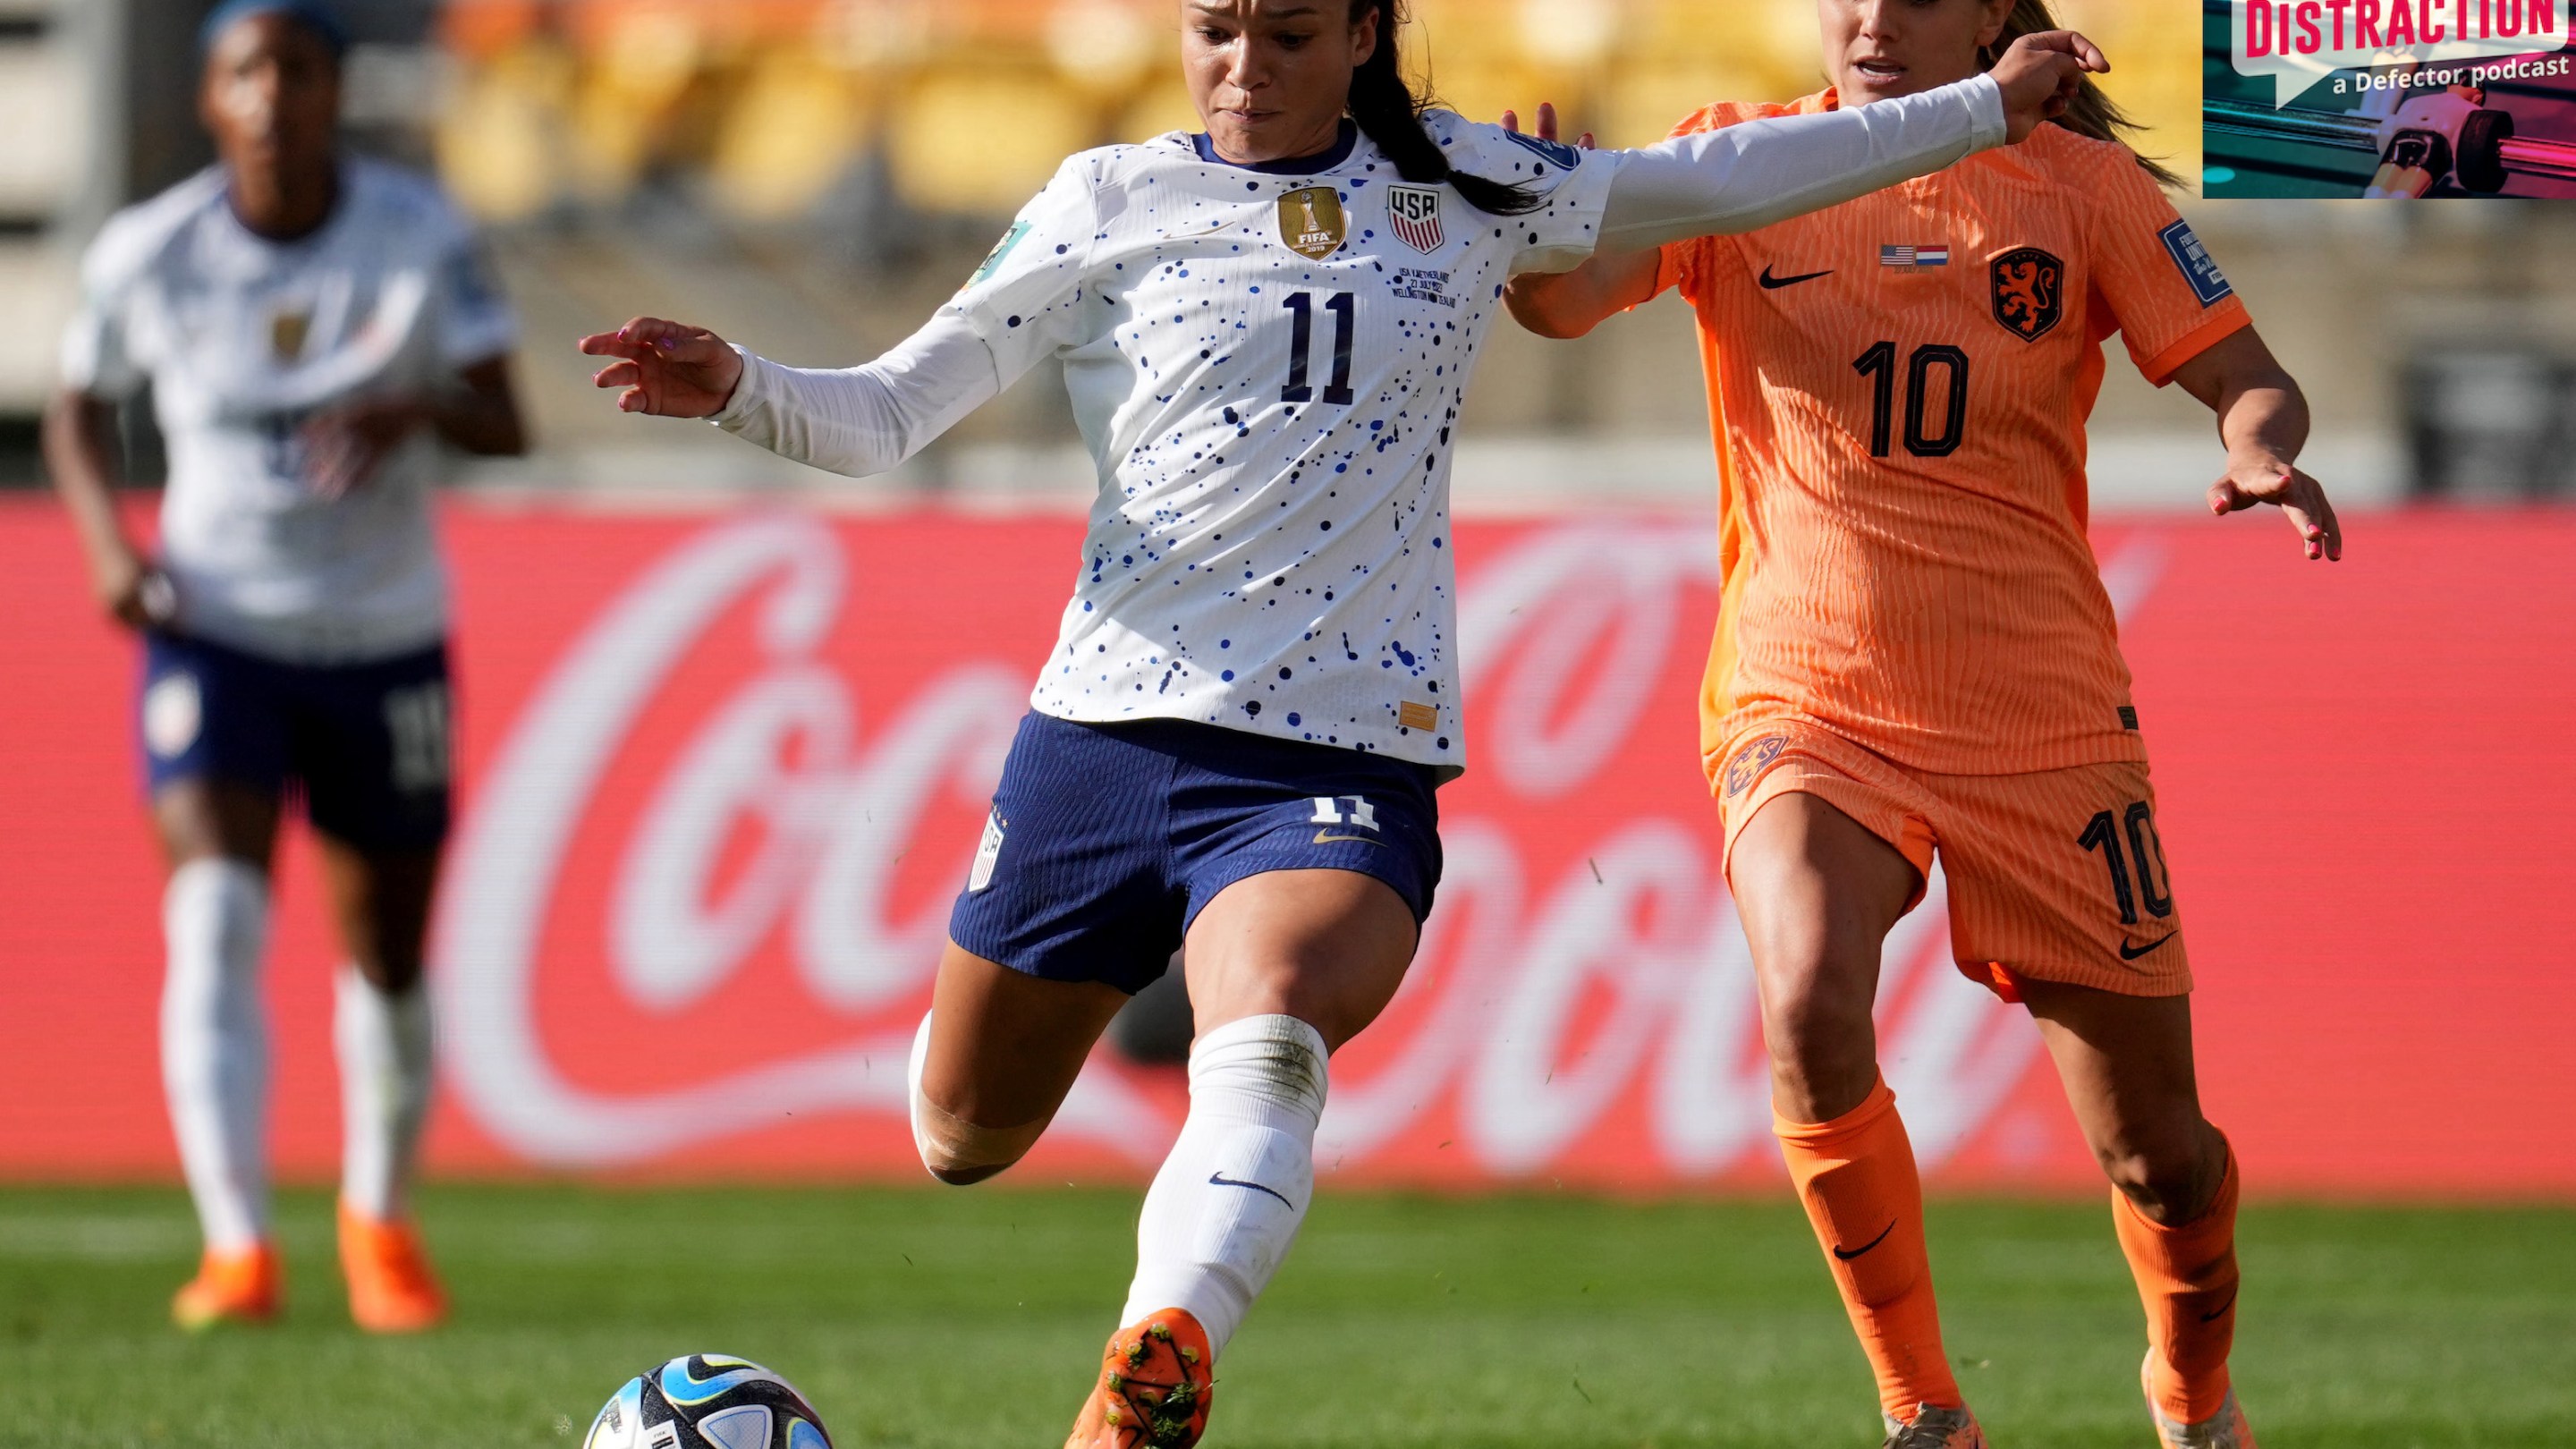 Sophia Smith lines up a shot in the US Women's National Team's game against the Netherlands in the Women's World Cup on Wednesday night.